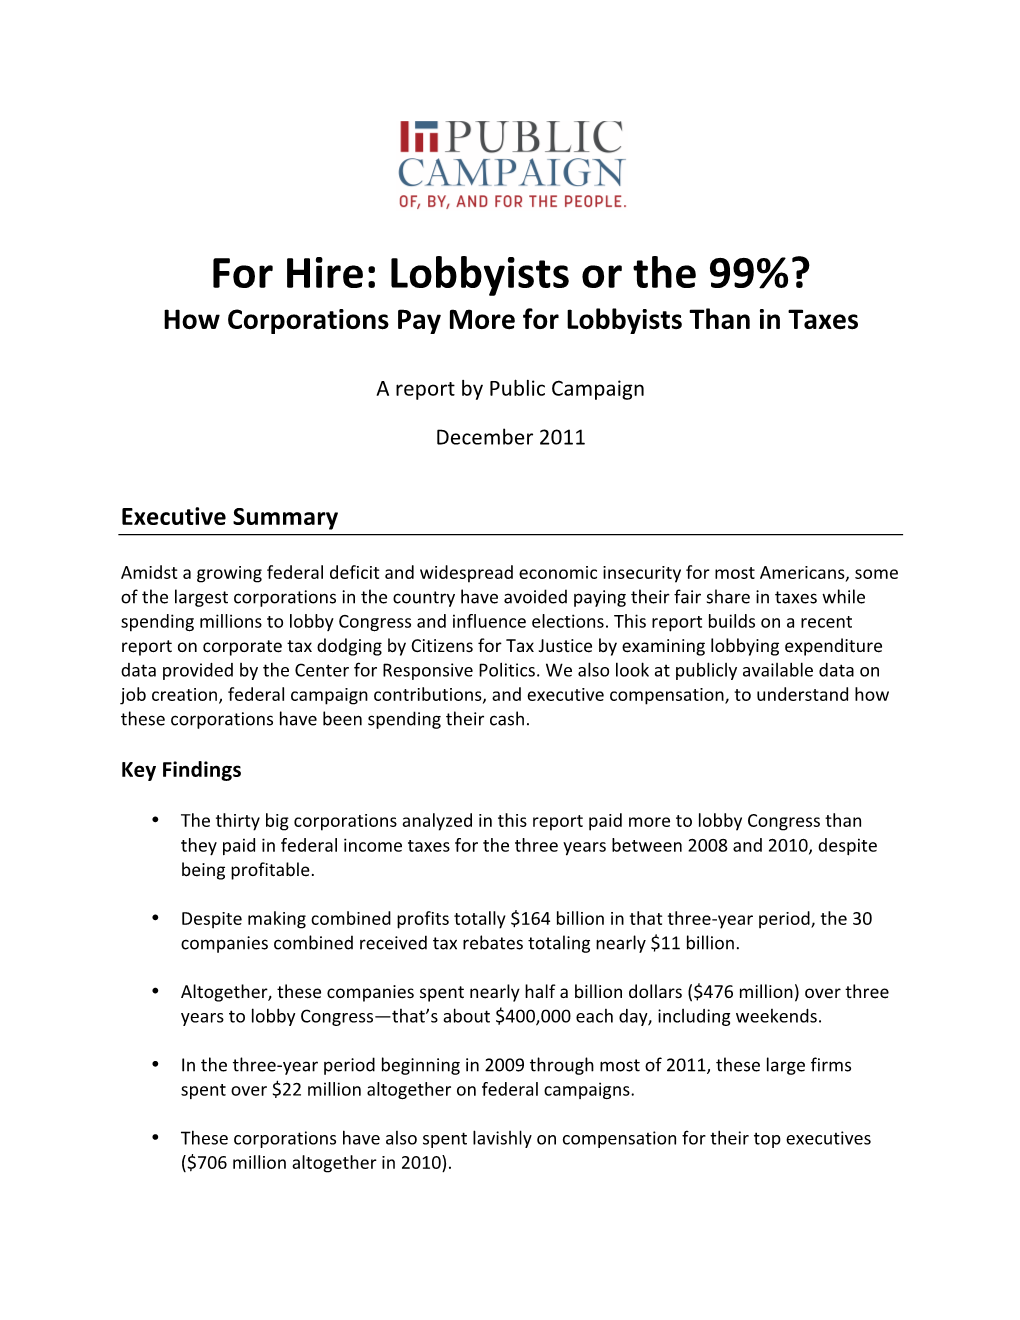 For Hire: Lobbyists Or the 99%? How Corporations Pay More for Lobbyists Than in Taxes